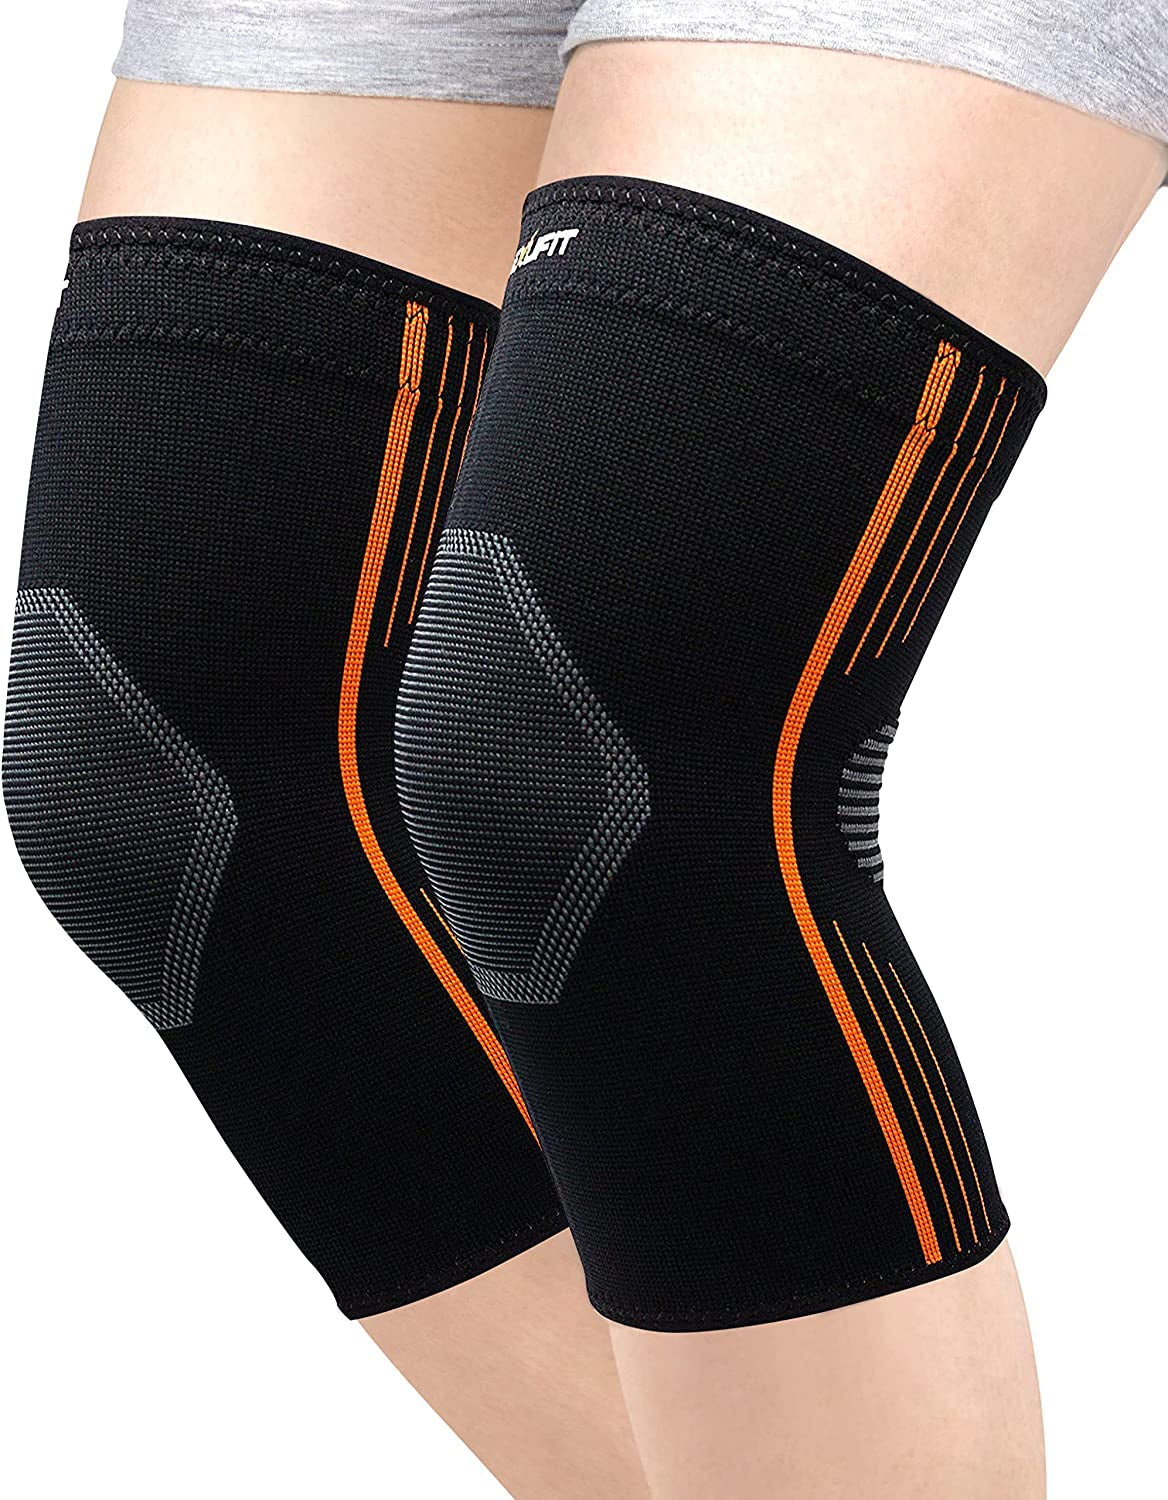 ® - Compression Knee Sleeves, Medical-Grade Knee Compression Sleeve Women and Men for Crossfit to Reduce Knee Pain In, Weightlifting, and Gym Knee Support, Orange, Small, Pack of 2